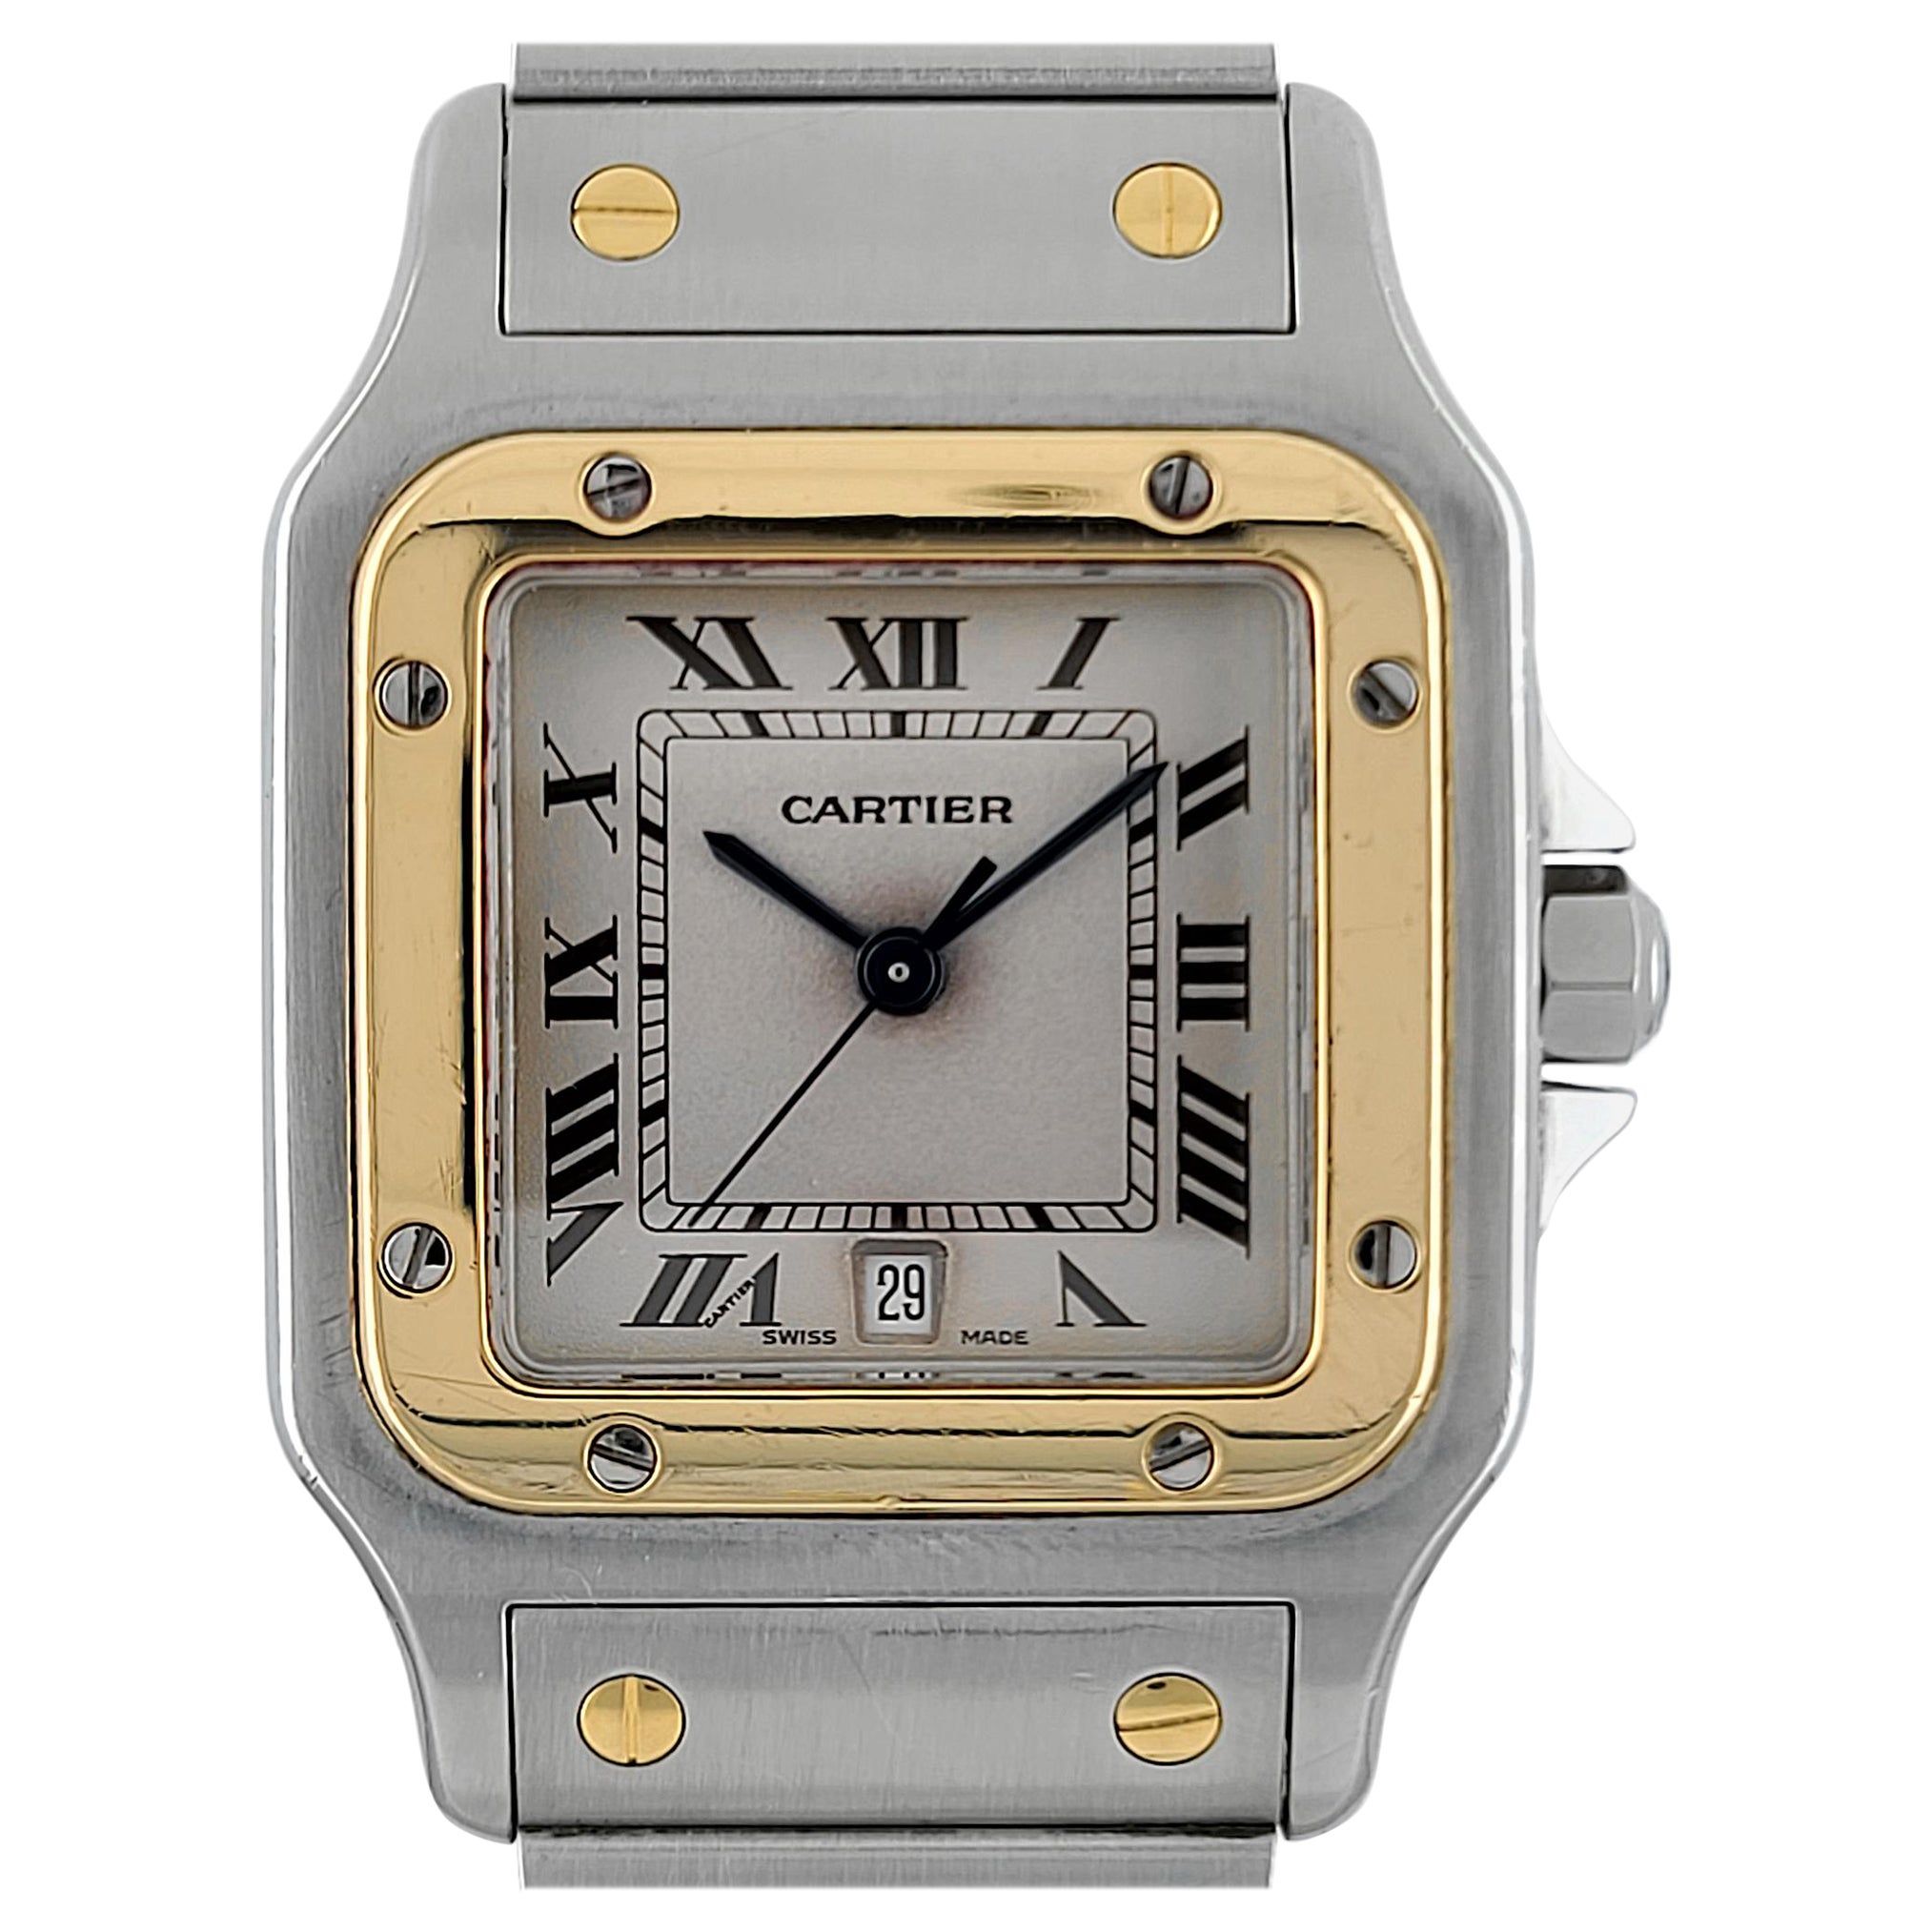 Cartier Santos Galbee Date 1566 Large LM GM 18k Gold Stainless Steel ...